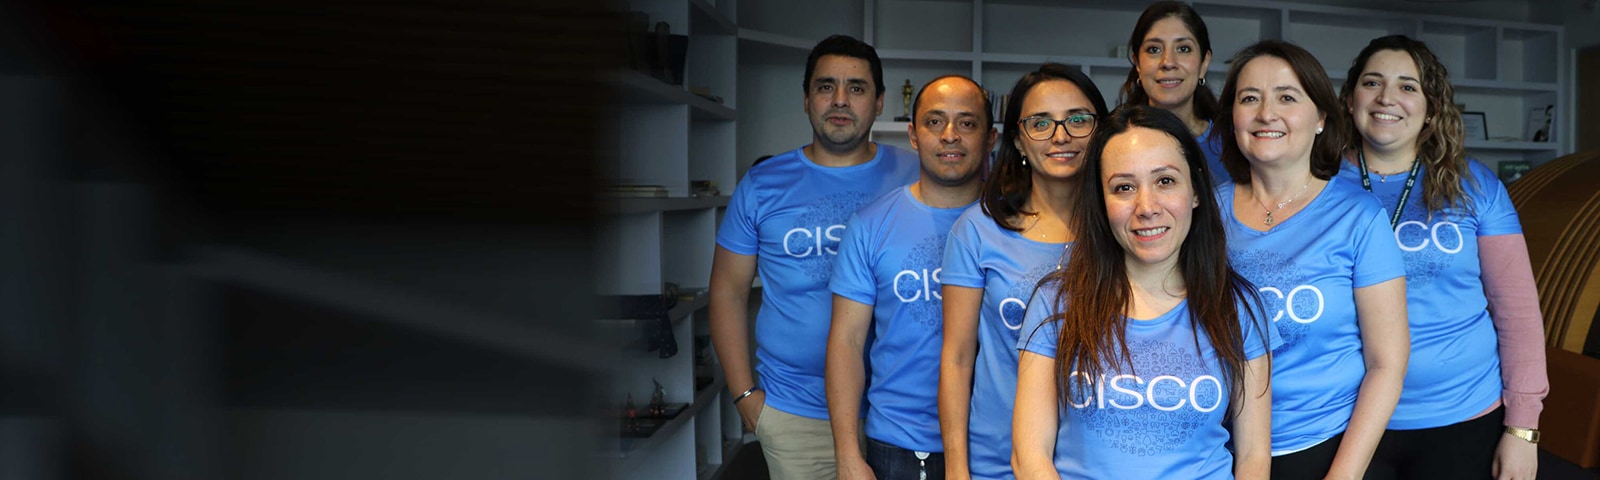 Seven people standing in a triangle formation smiling and wearing the same Cisco shirt.